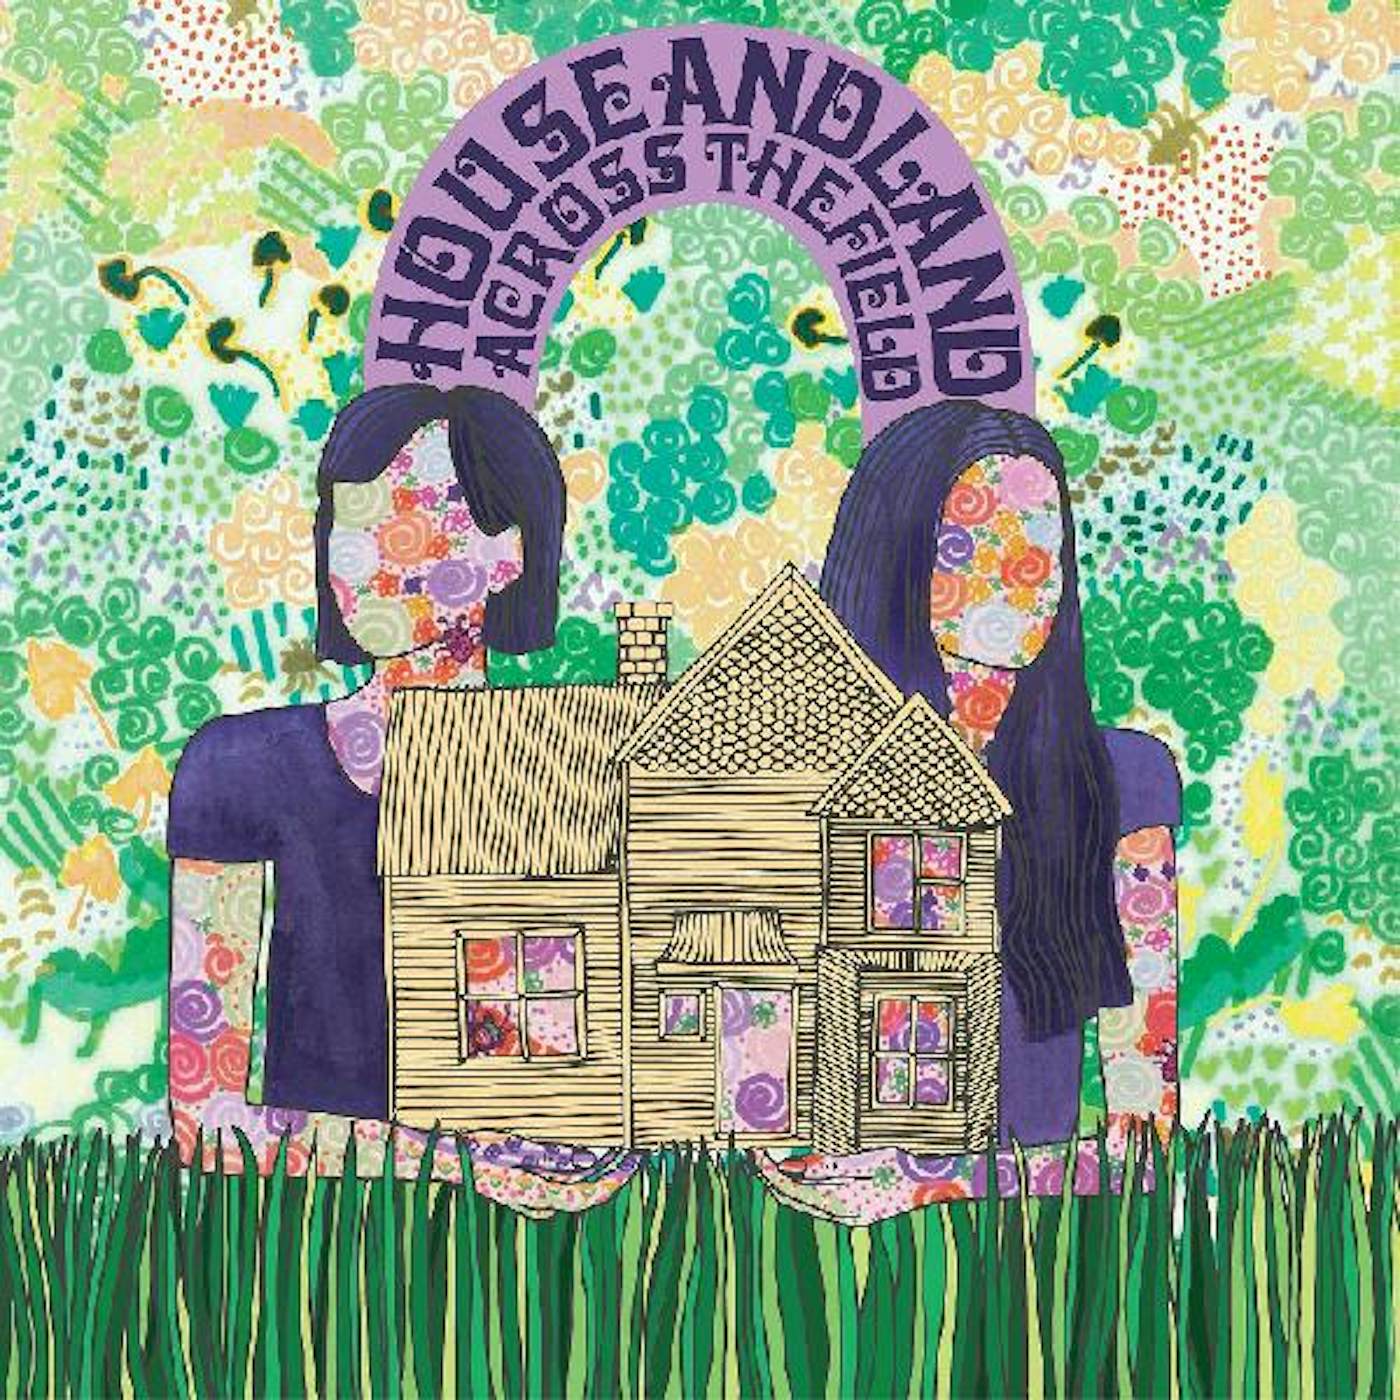 House and Land ACROSS THE FIELD CD